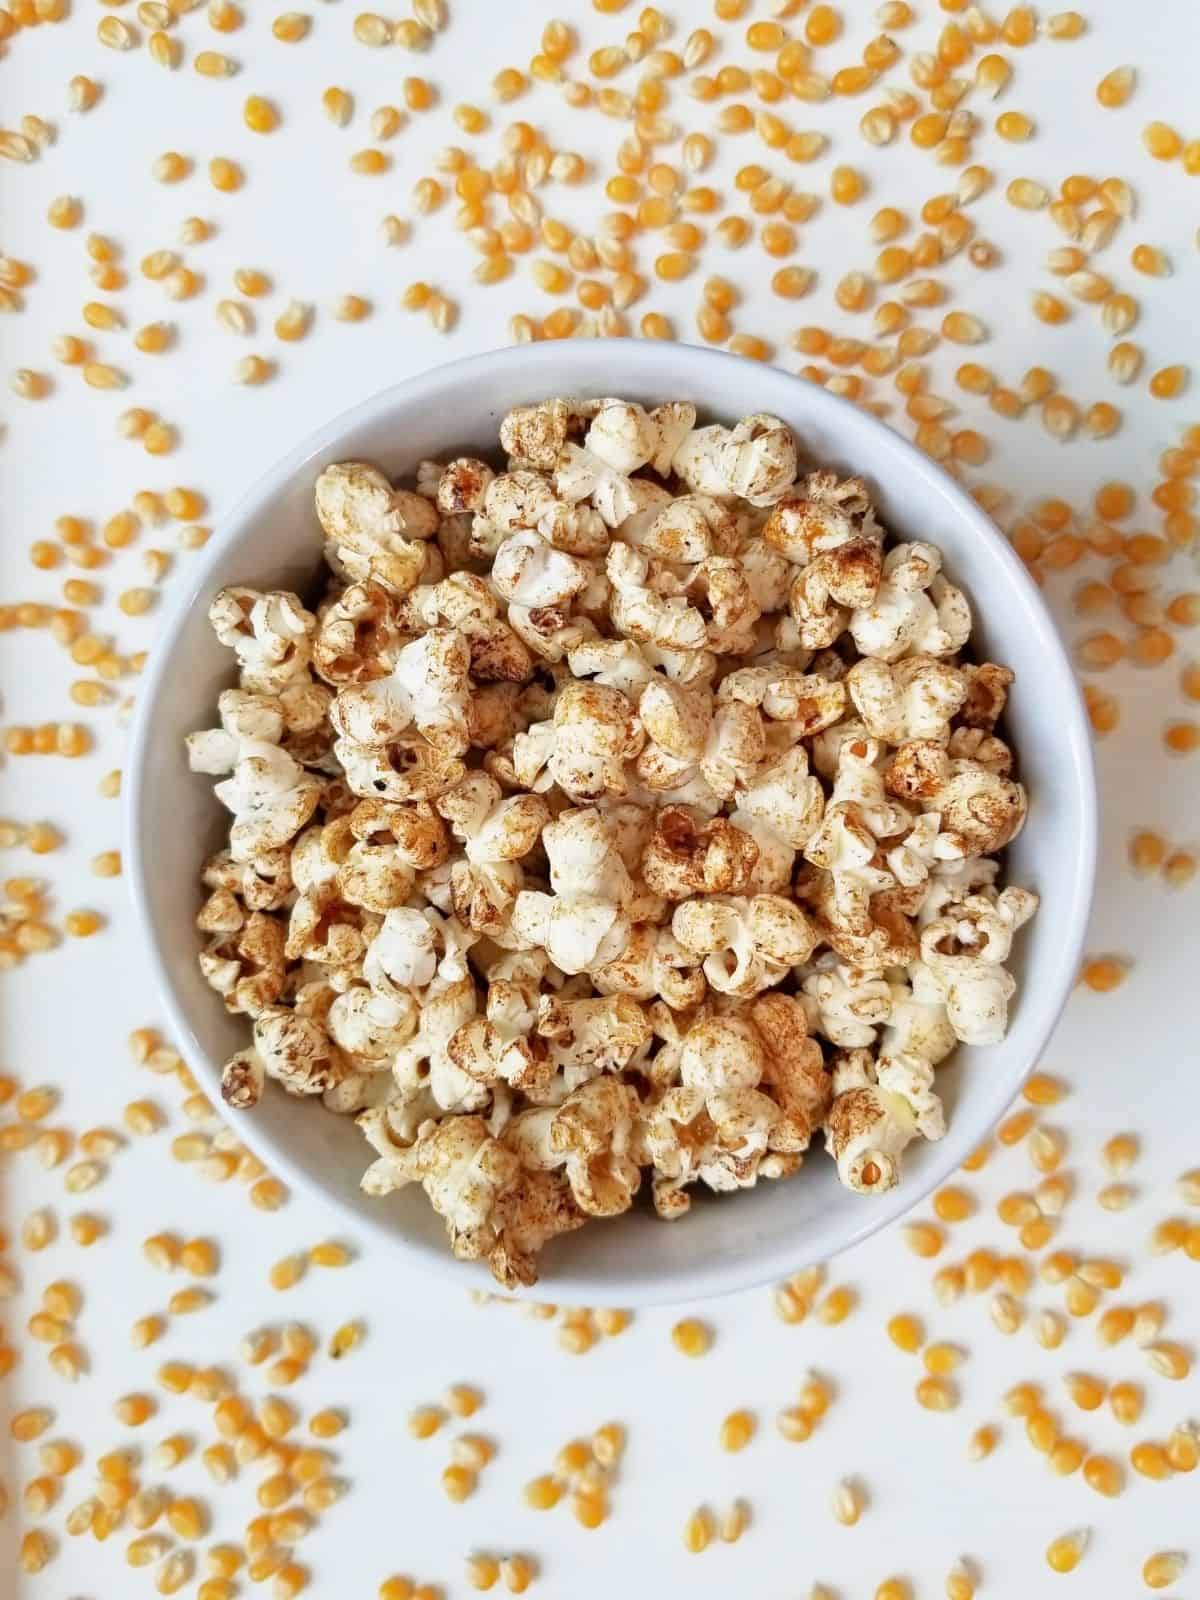 white bowl of kettle corn on a white background with unpopped kernels surrounding it.